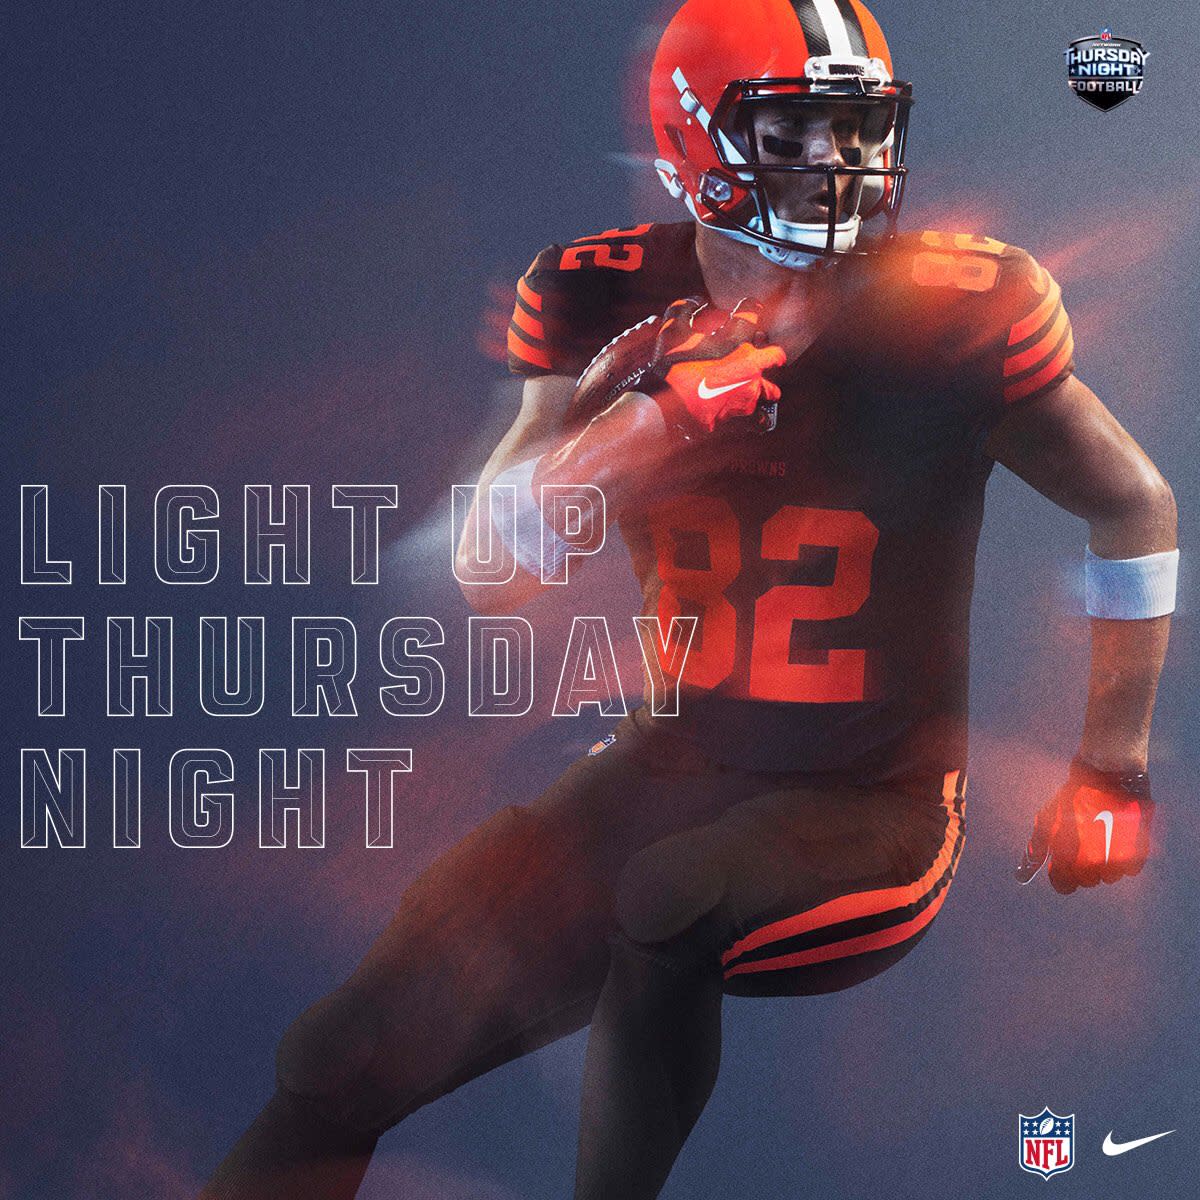 NFL's color rush uniforms continue to look awful